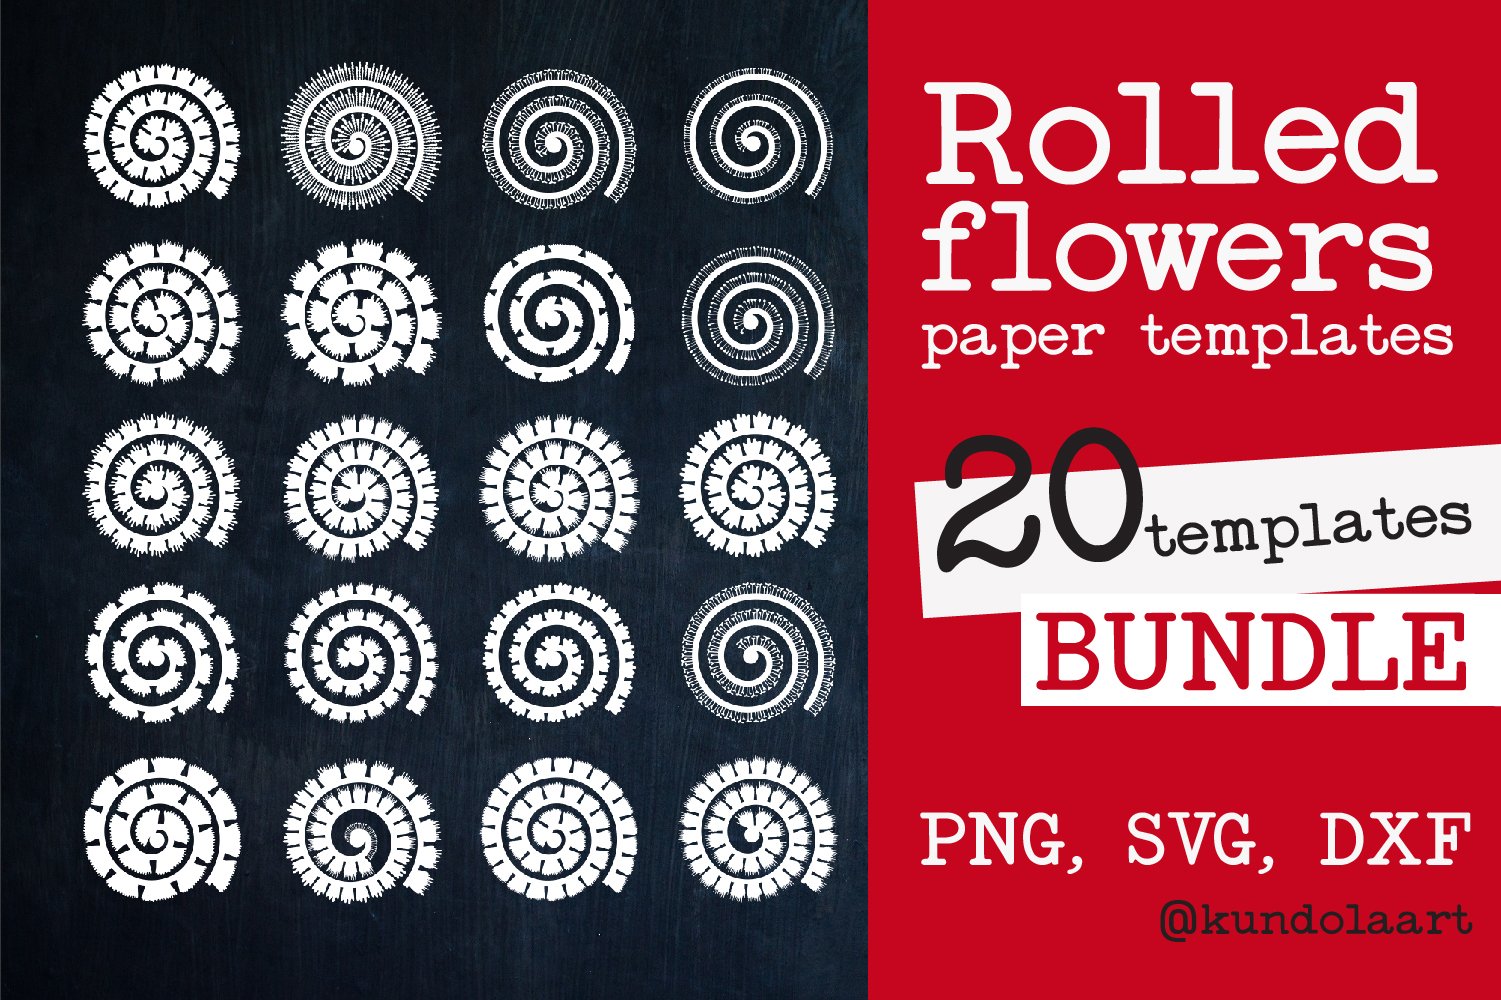 Rolled flowers paper templates.